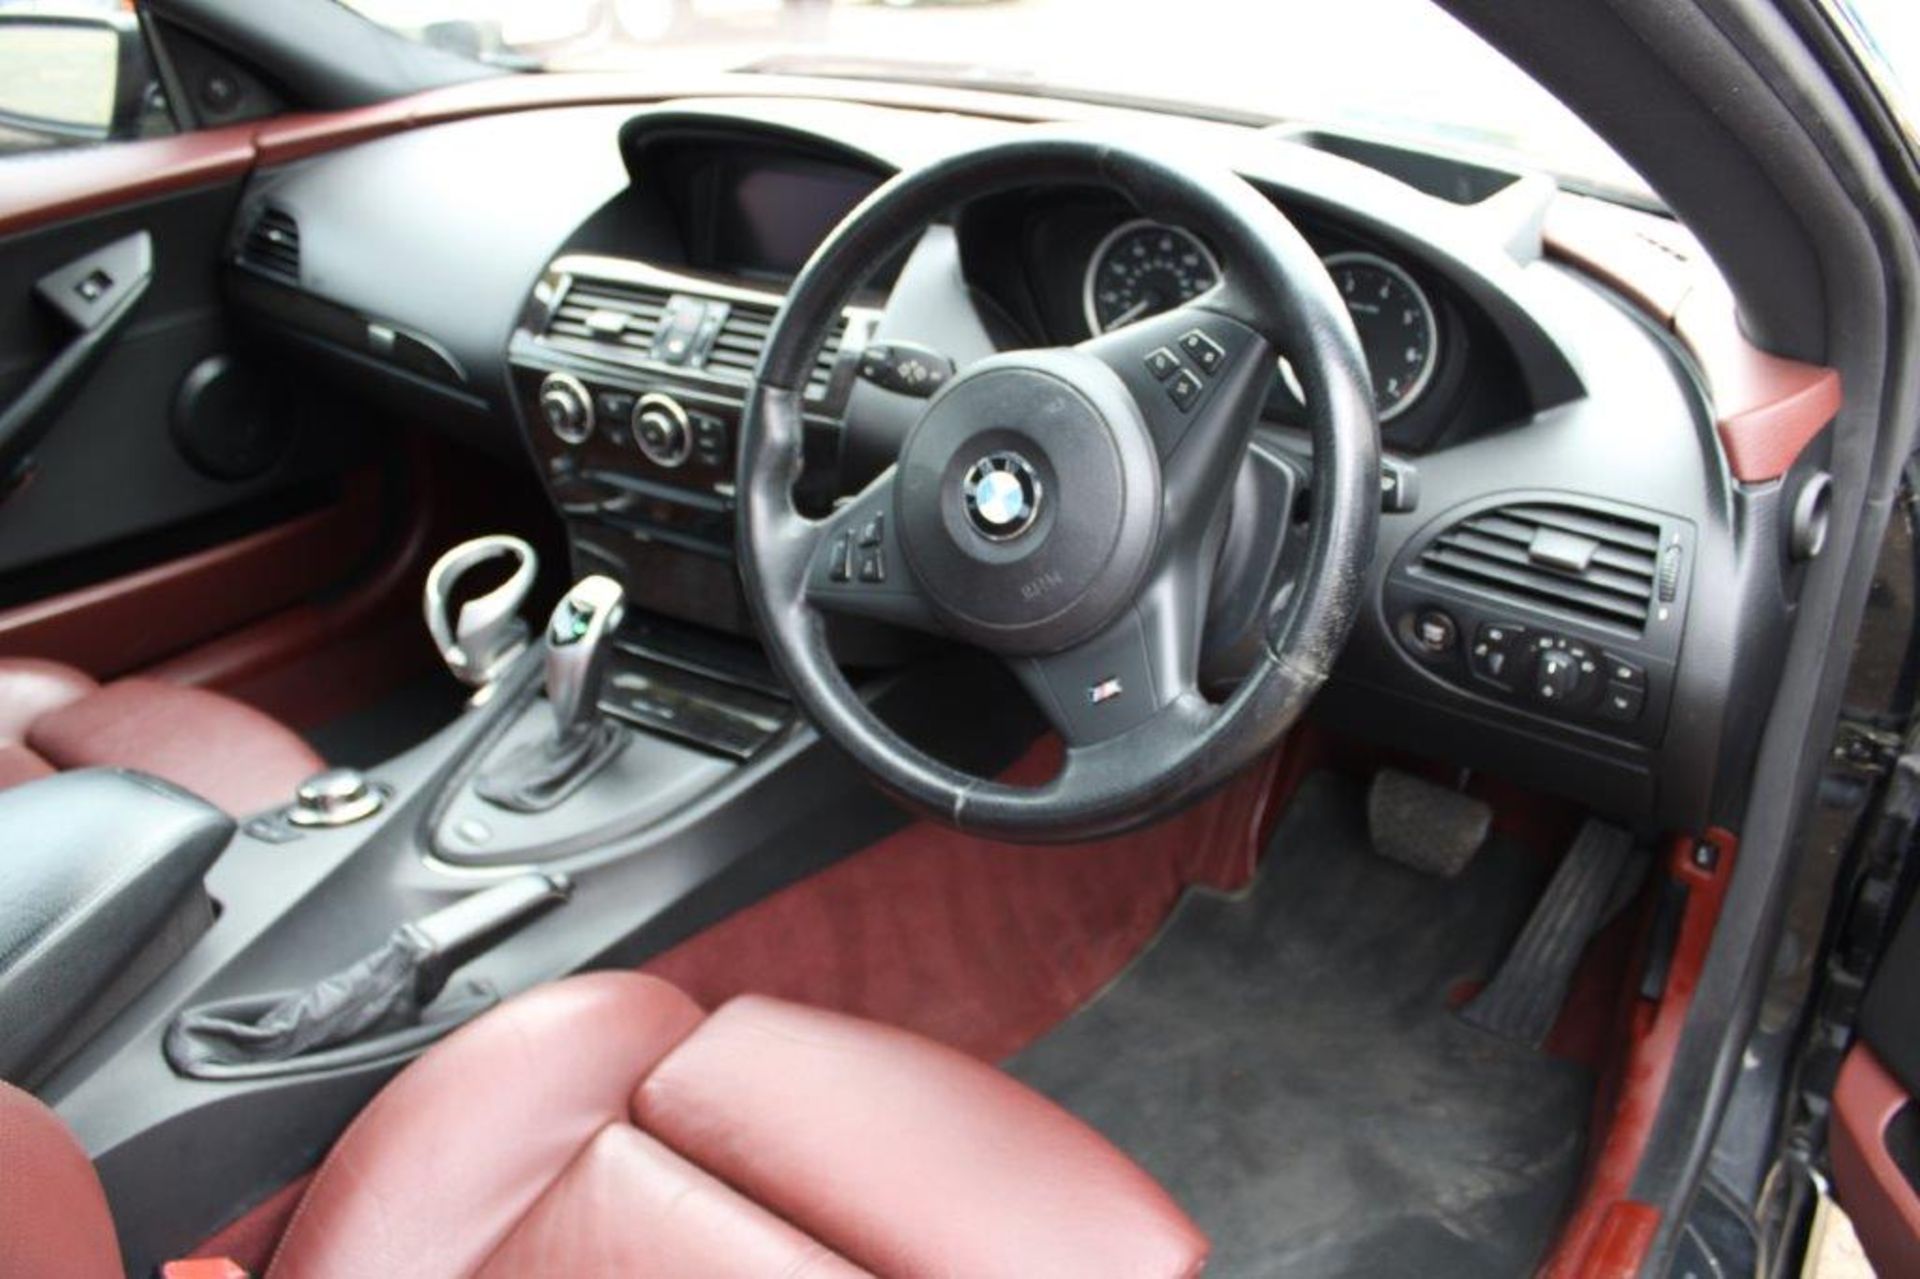 2005 BMW 650i Sport Coupe Auto - Image 8 of 16